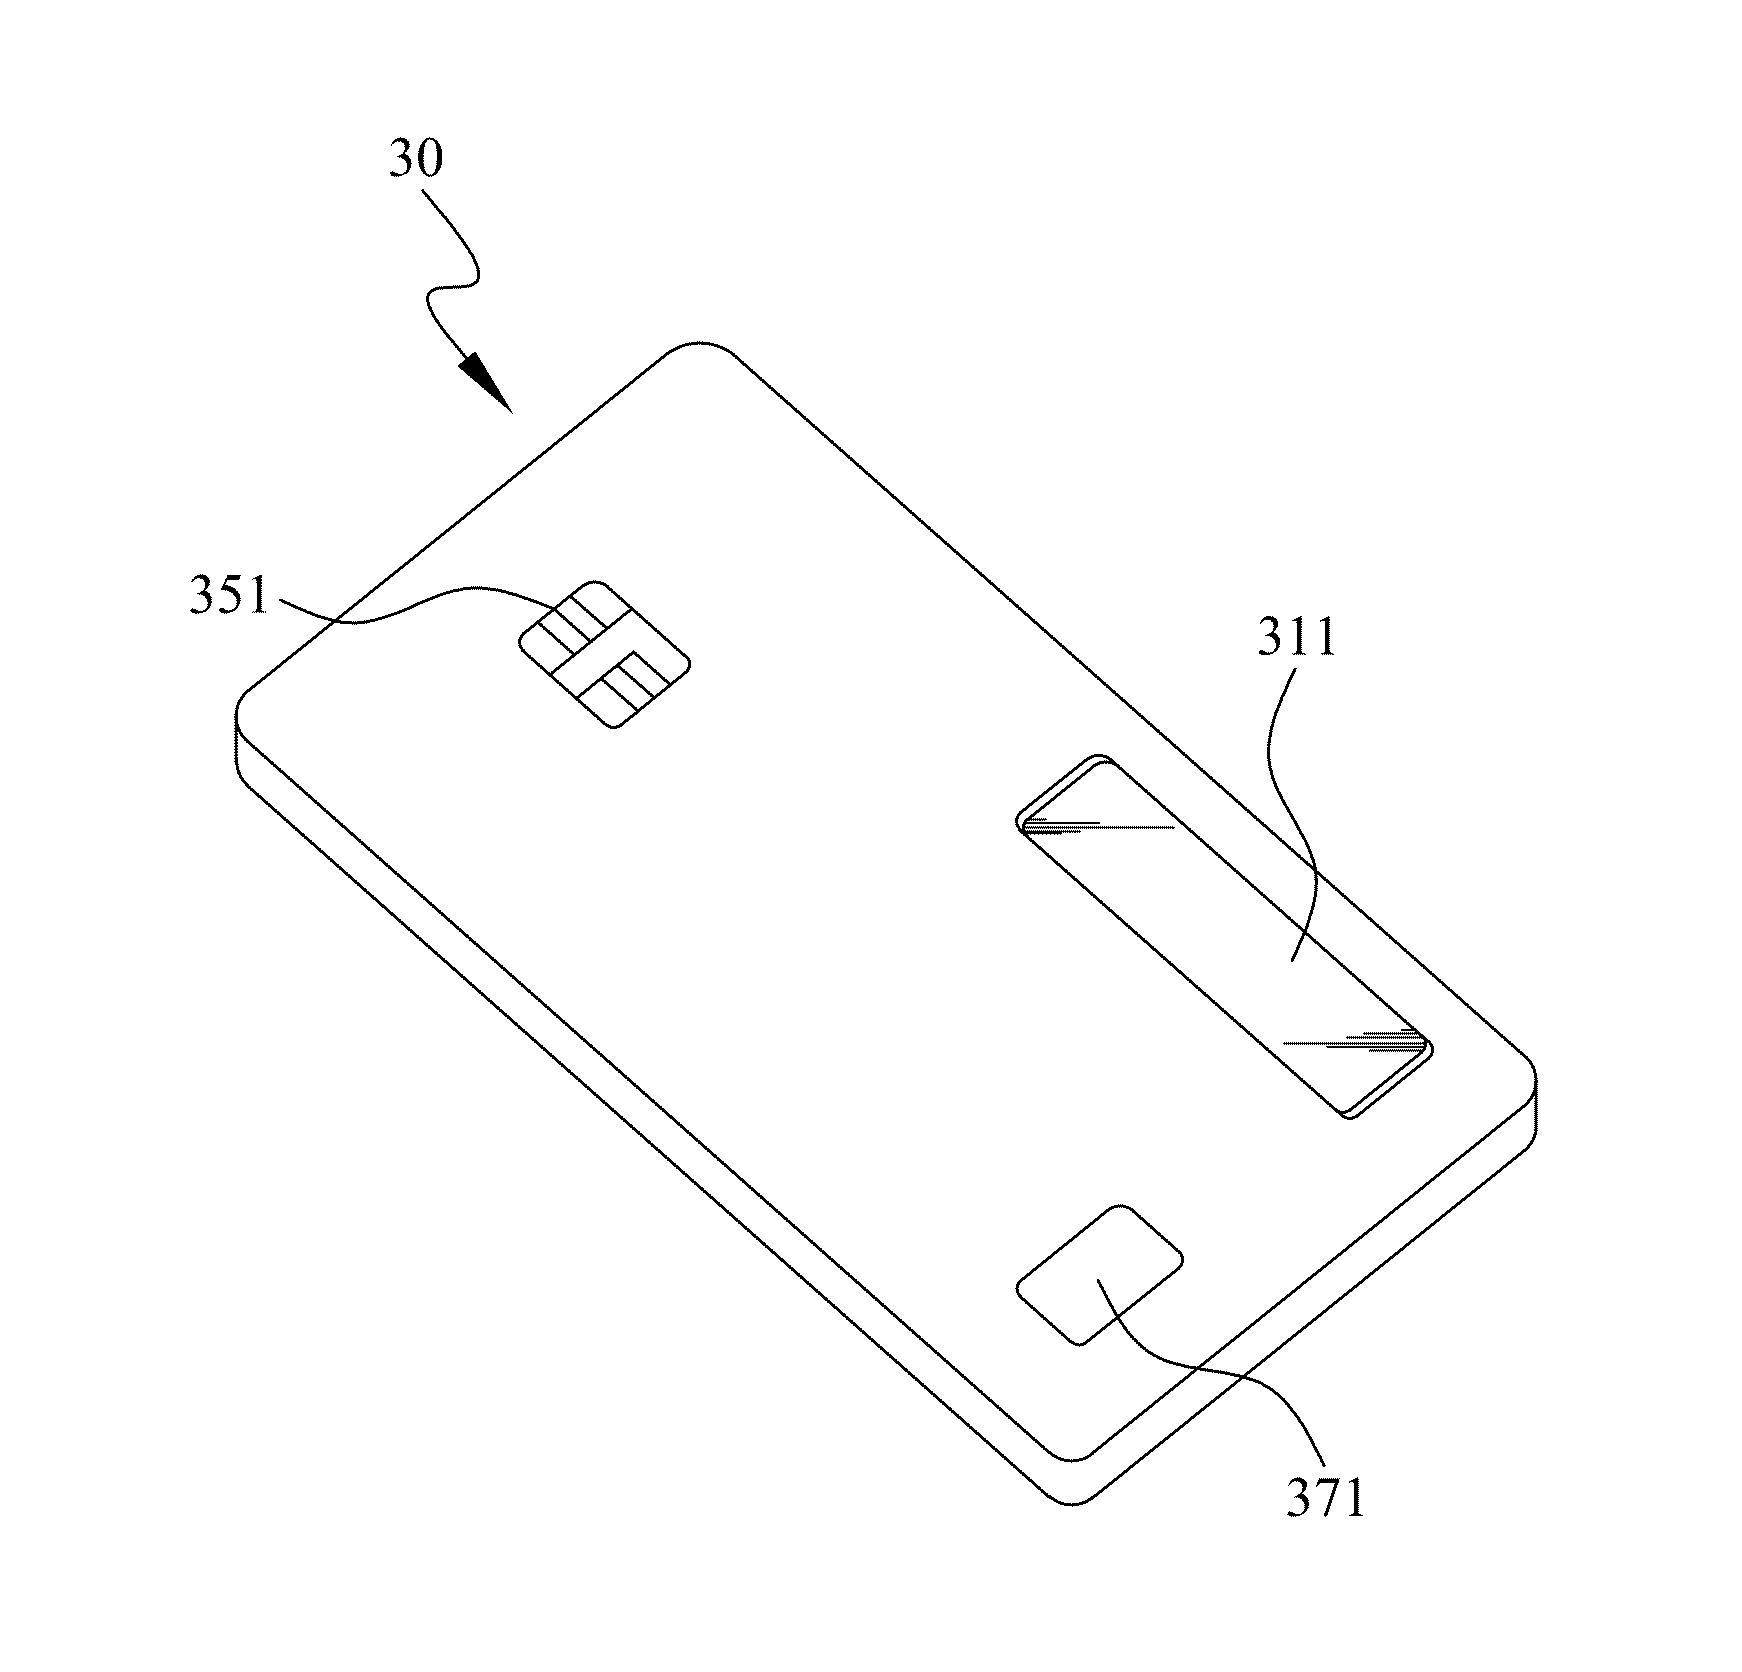 Display-enabled card with security authentication function